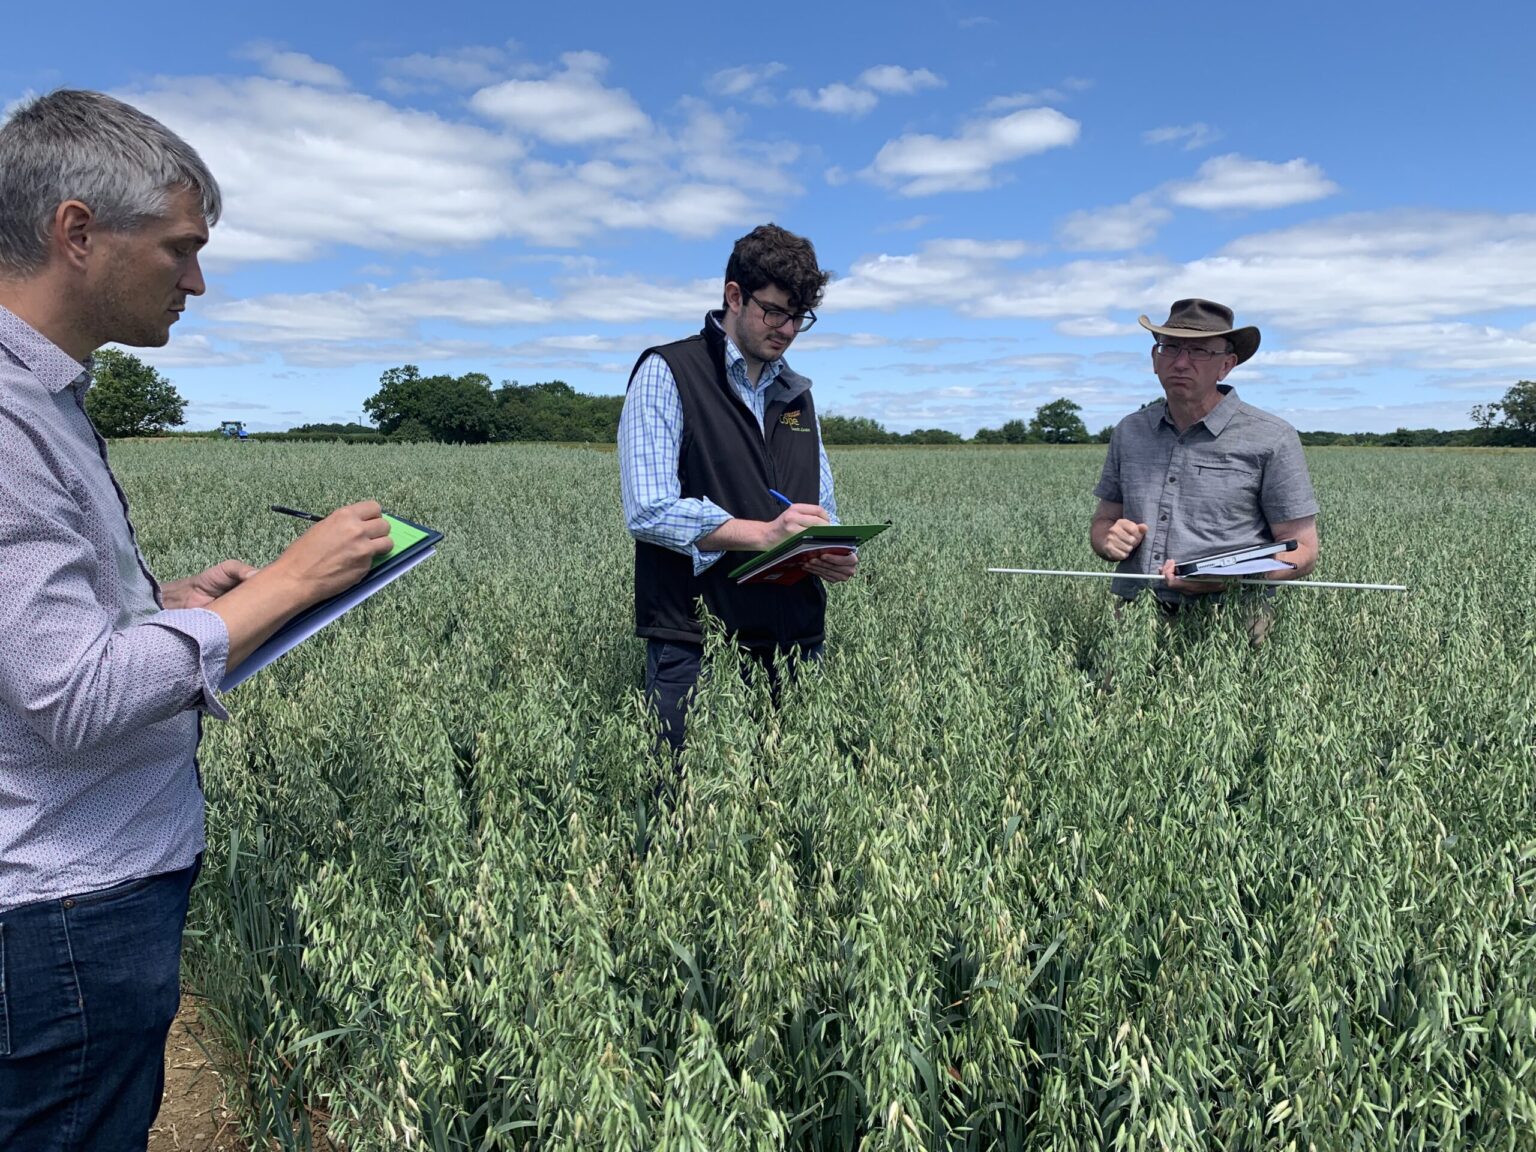 Cope Seeds & Grain team in a field of Delfin spring oats|Cope Seeds & Grain staff in a field of Delfin spring oats